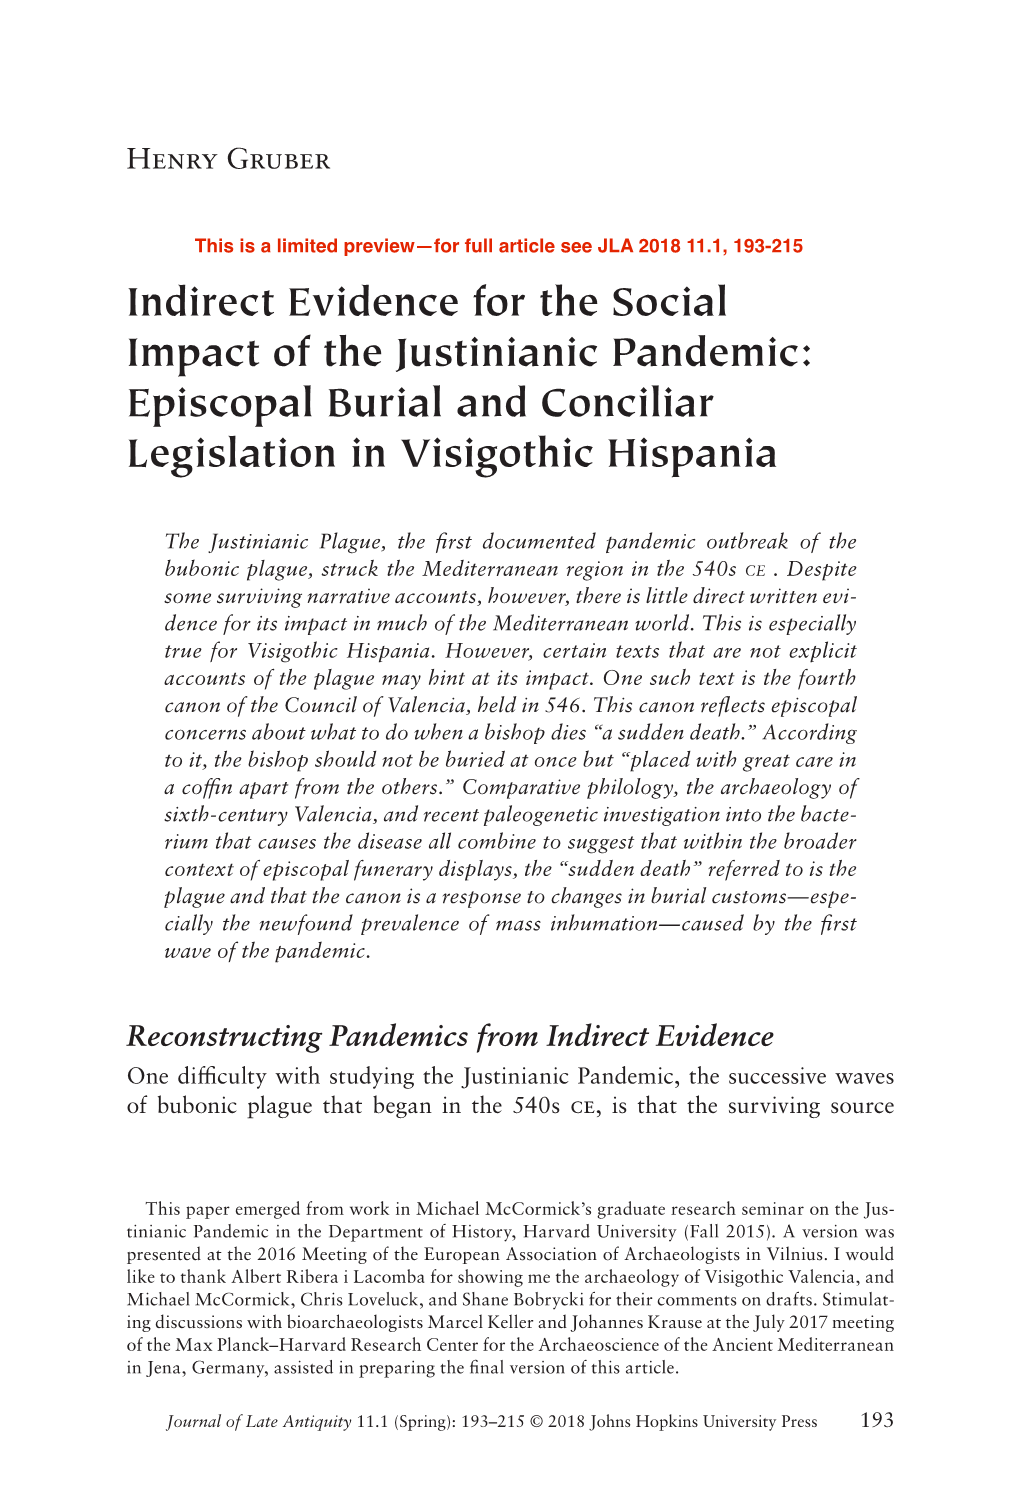 Indirect Evidence for the Social Impact of the Justinianic Pandemic: Episcopal Burial and Conciliar Legislation in Visigothic Hispania